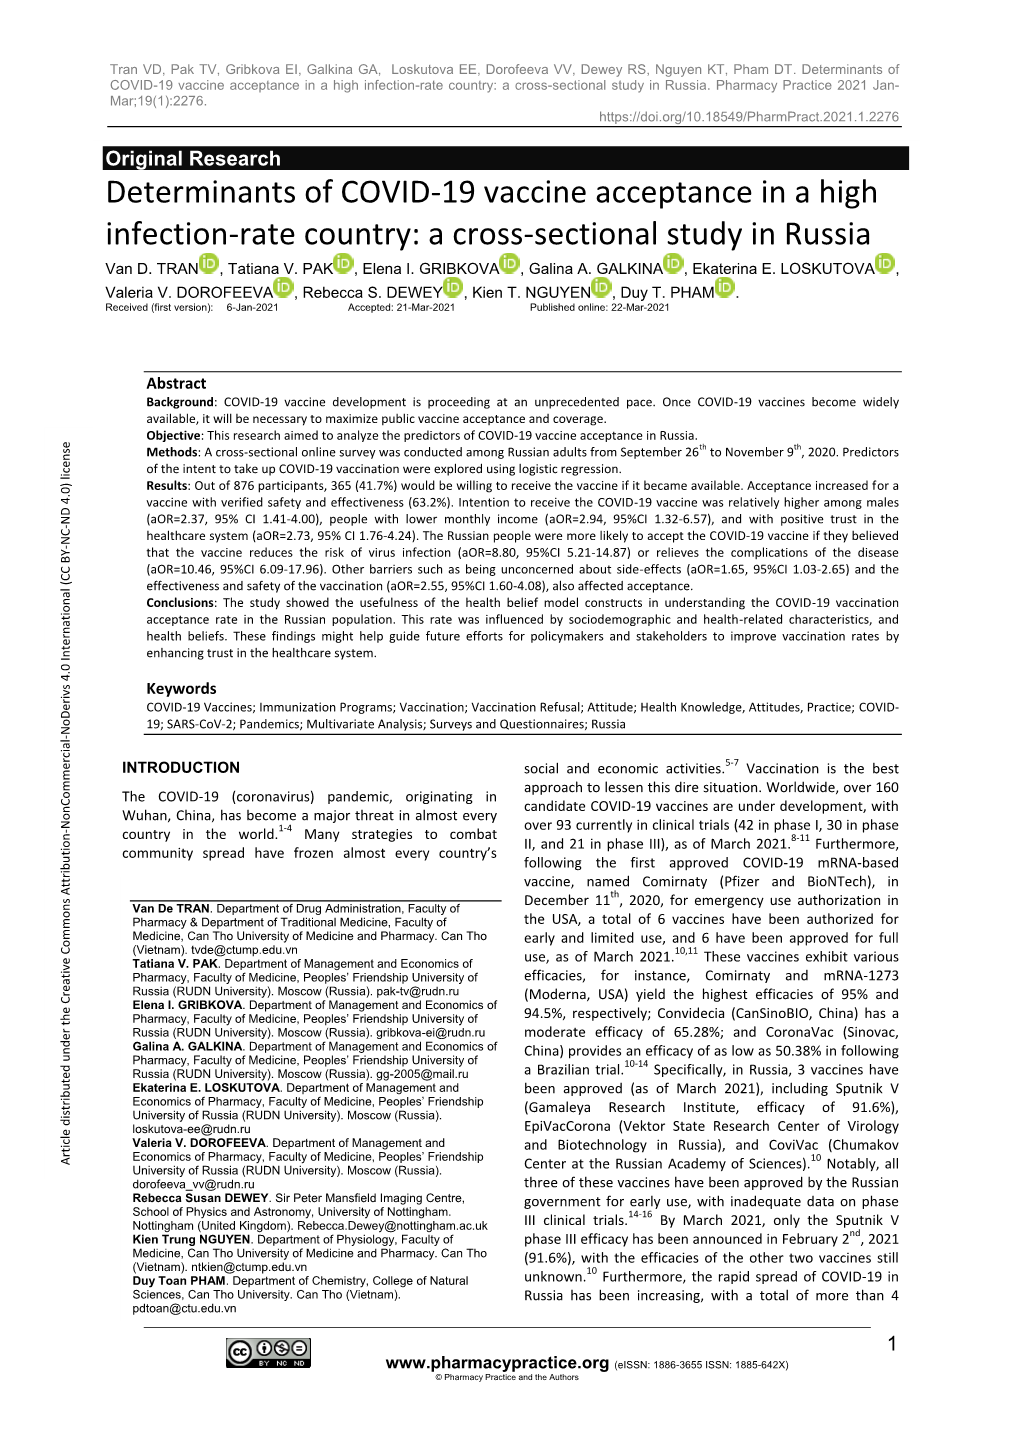 Determinants of COVID-19 Vaccine Acceptance in a High Infection-Rate Country: a Cross-Sectional Study in Russia